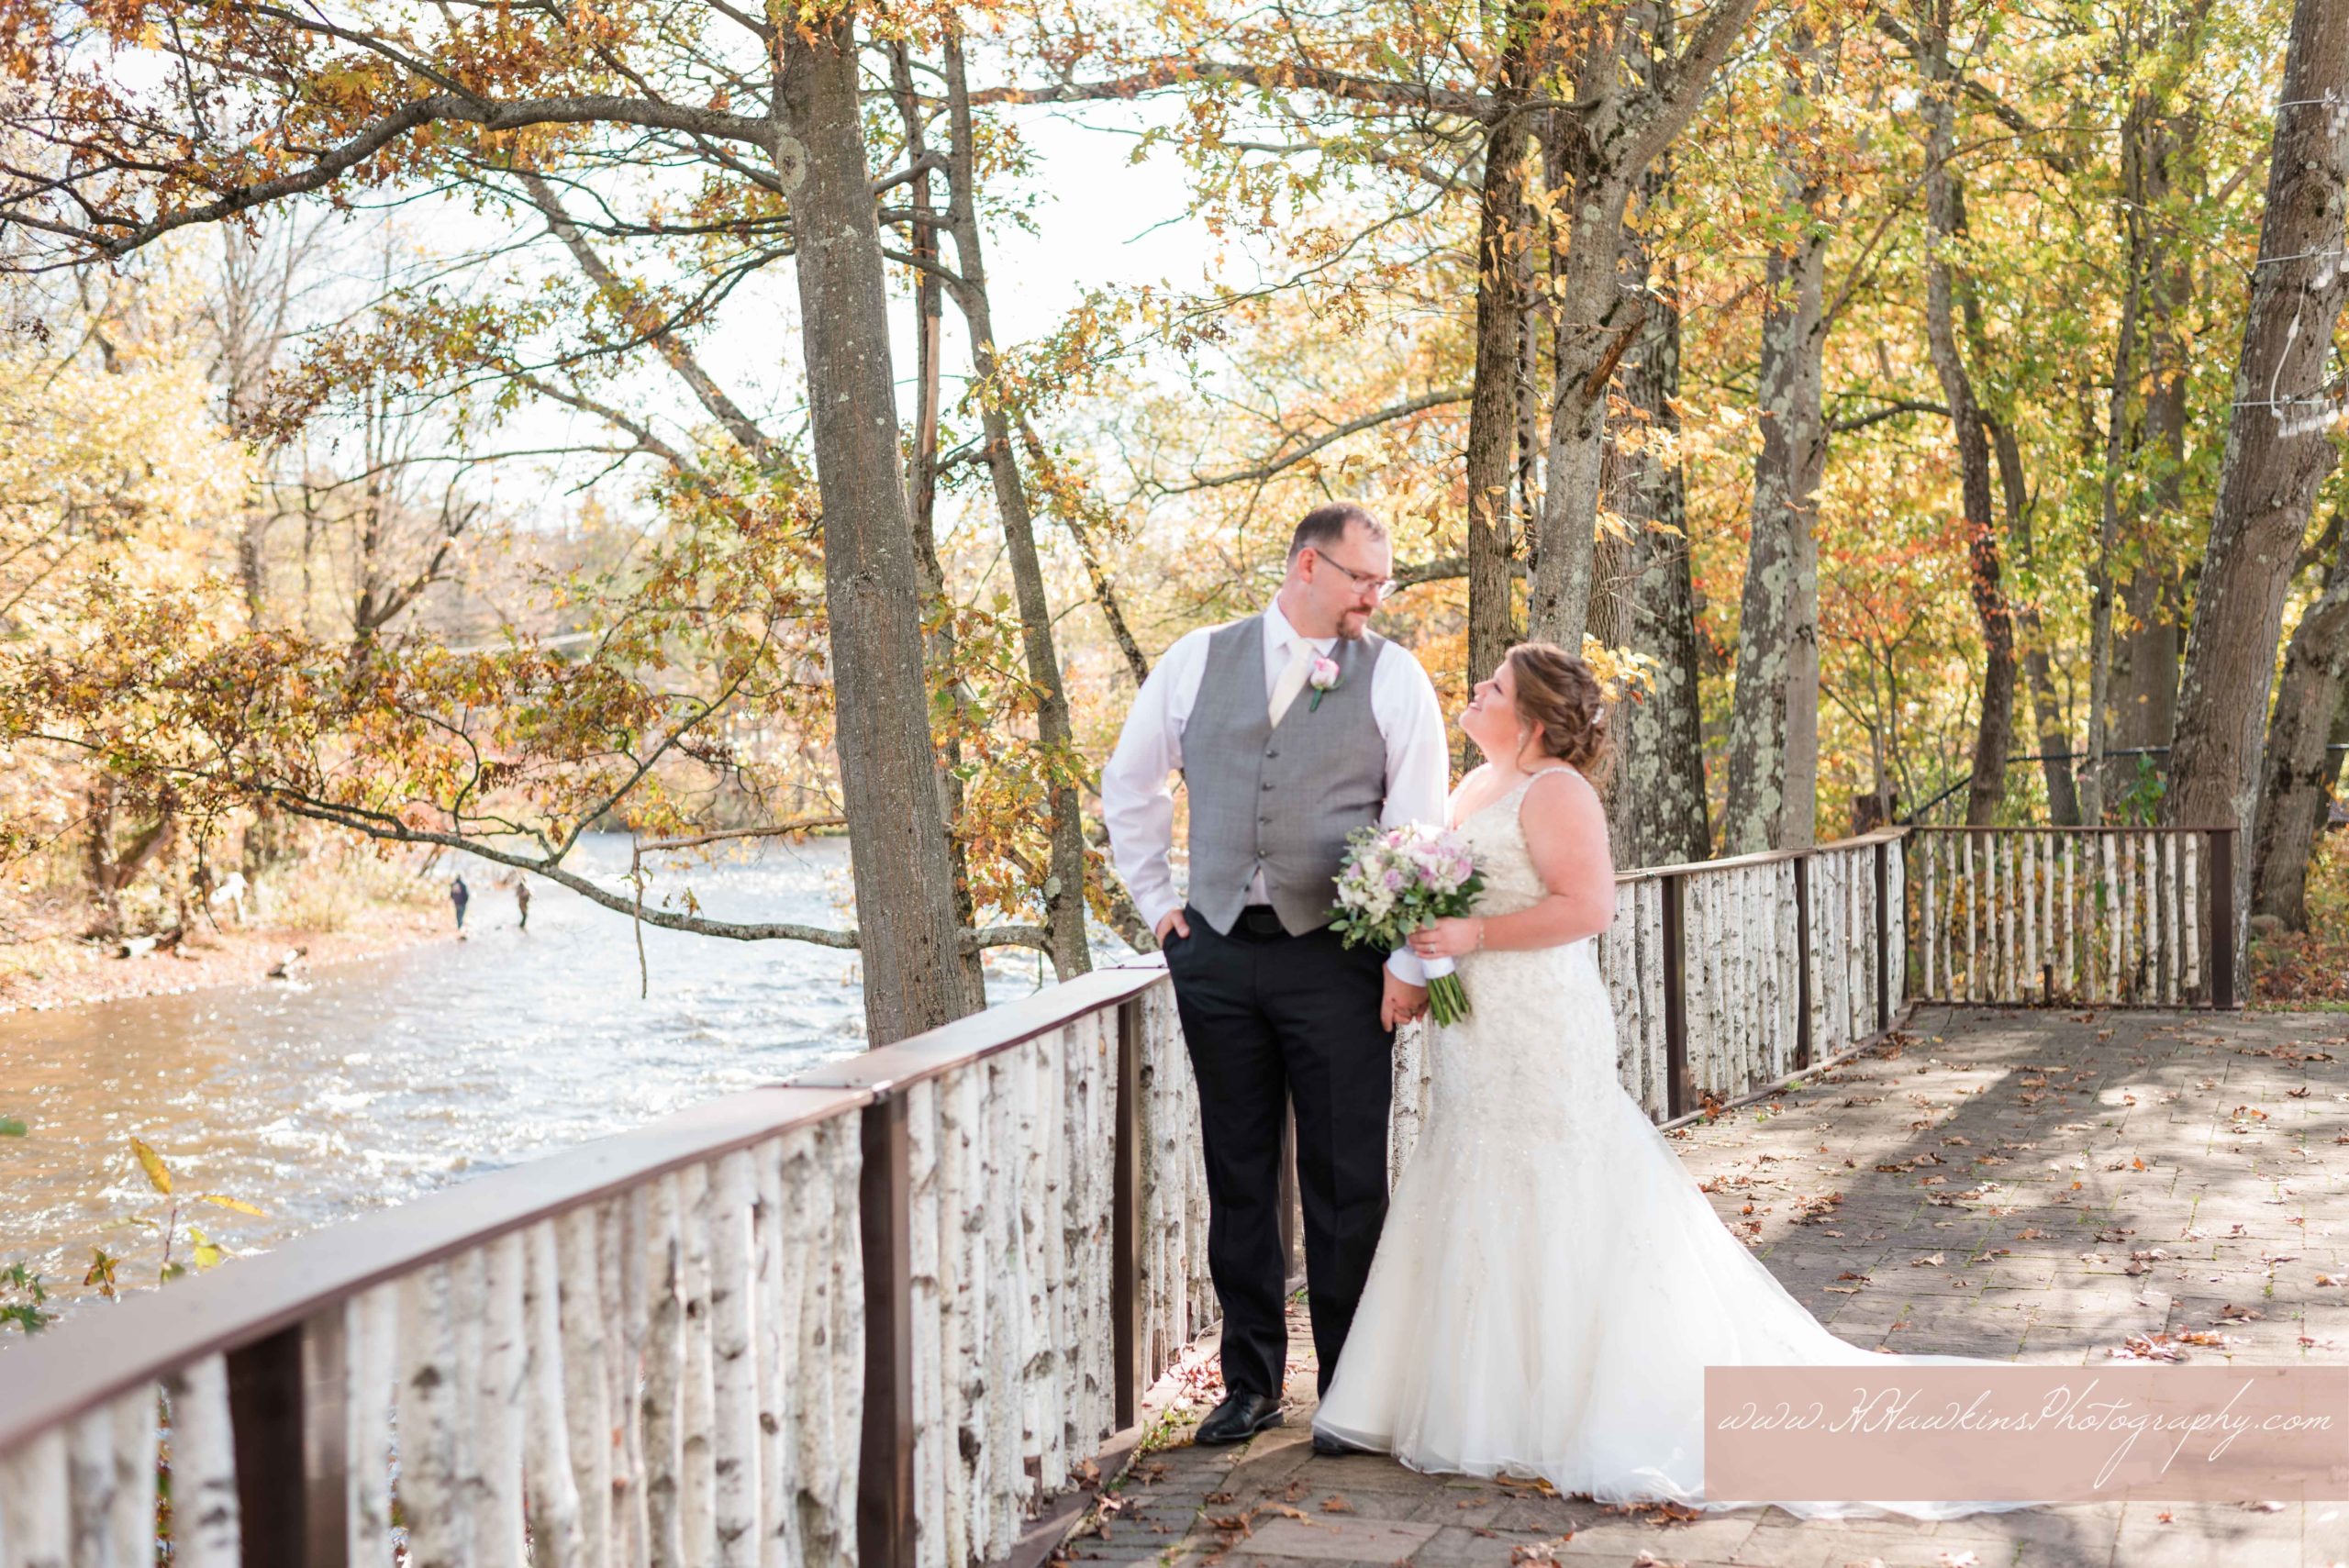 Bride and groom portraits at Tailwater Lodge's ceremony site by Salmon River with white birch railing and autumn leaves